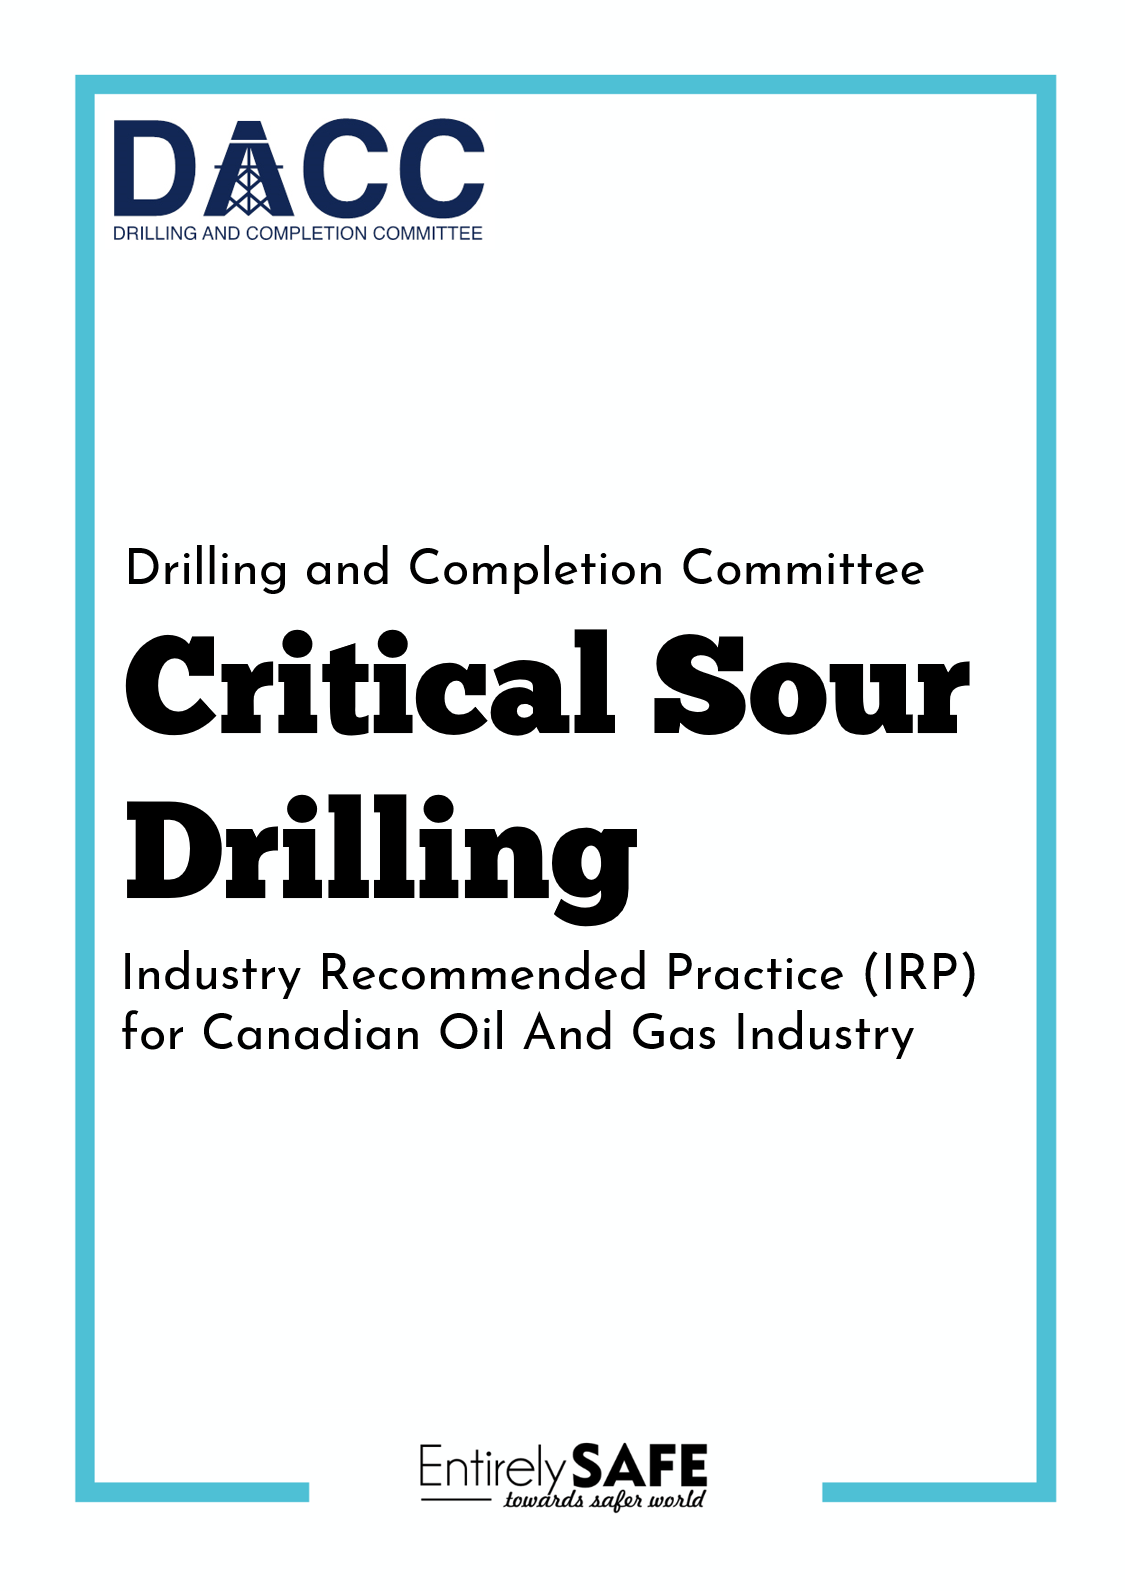 169-Critical-Sour-Drilling-IRP-for-Canadian-Oil-Gas-Industry